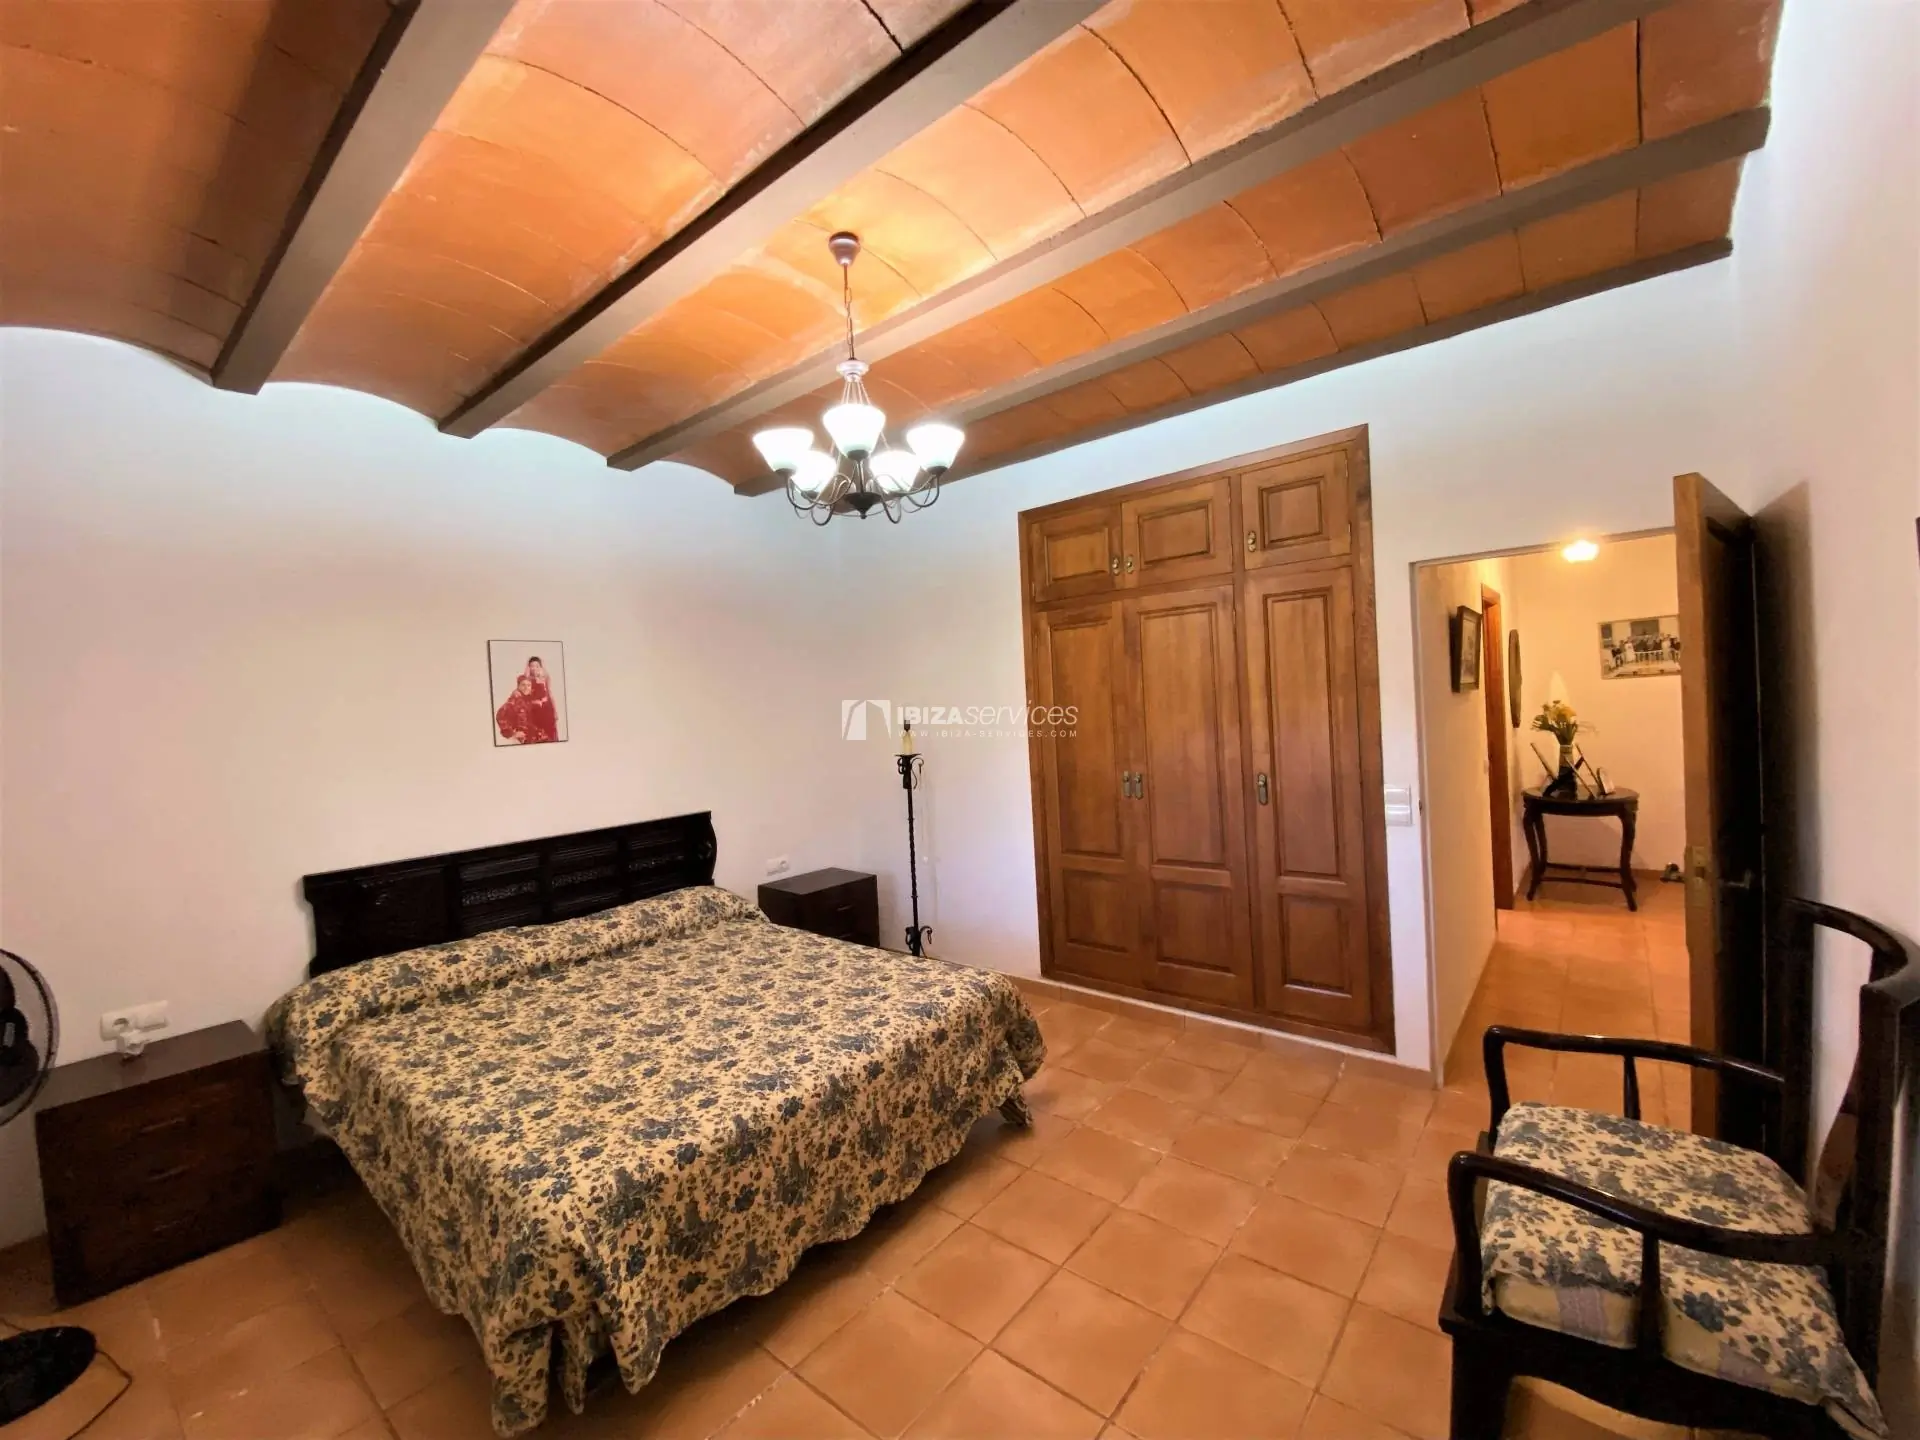 Finca long term rental in the center of the island.